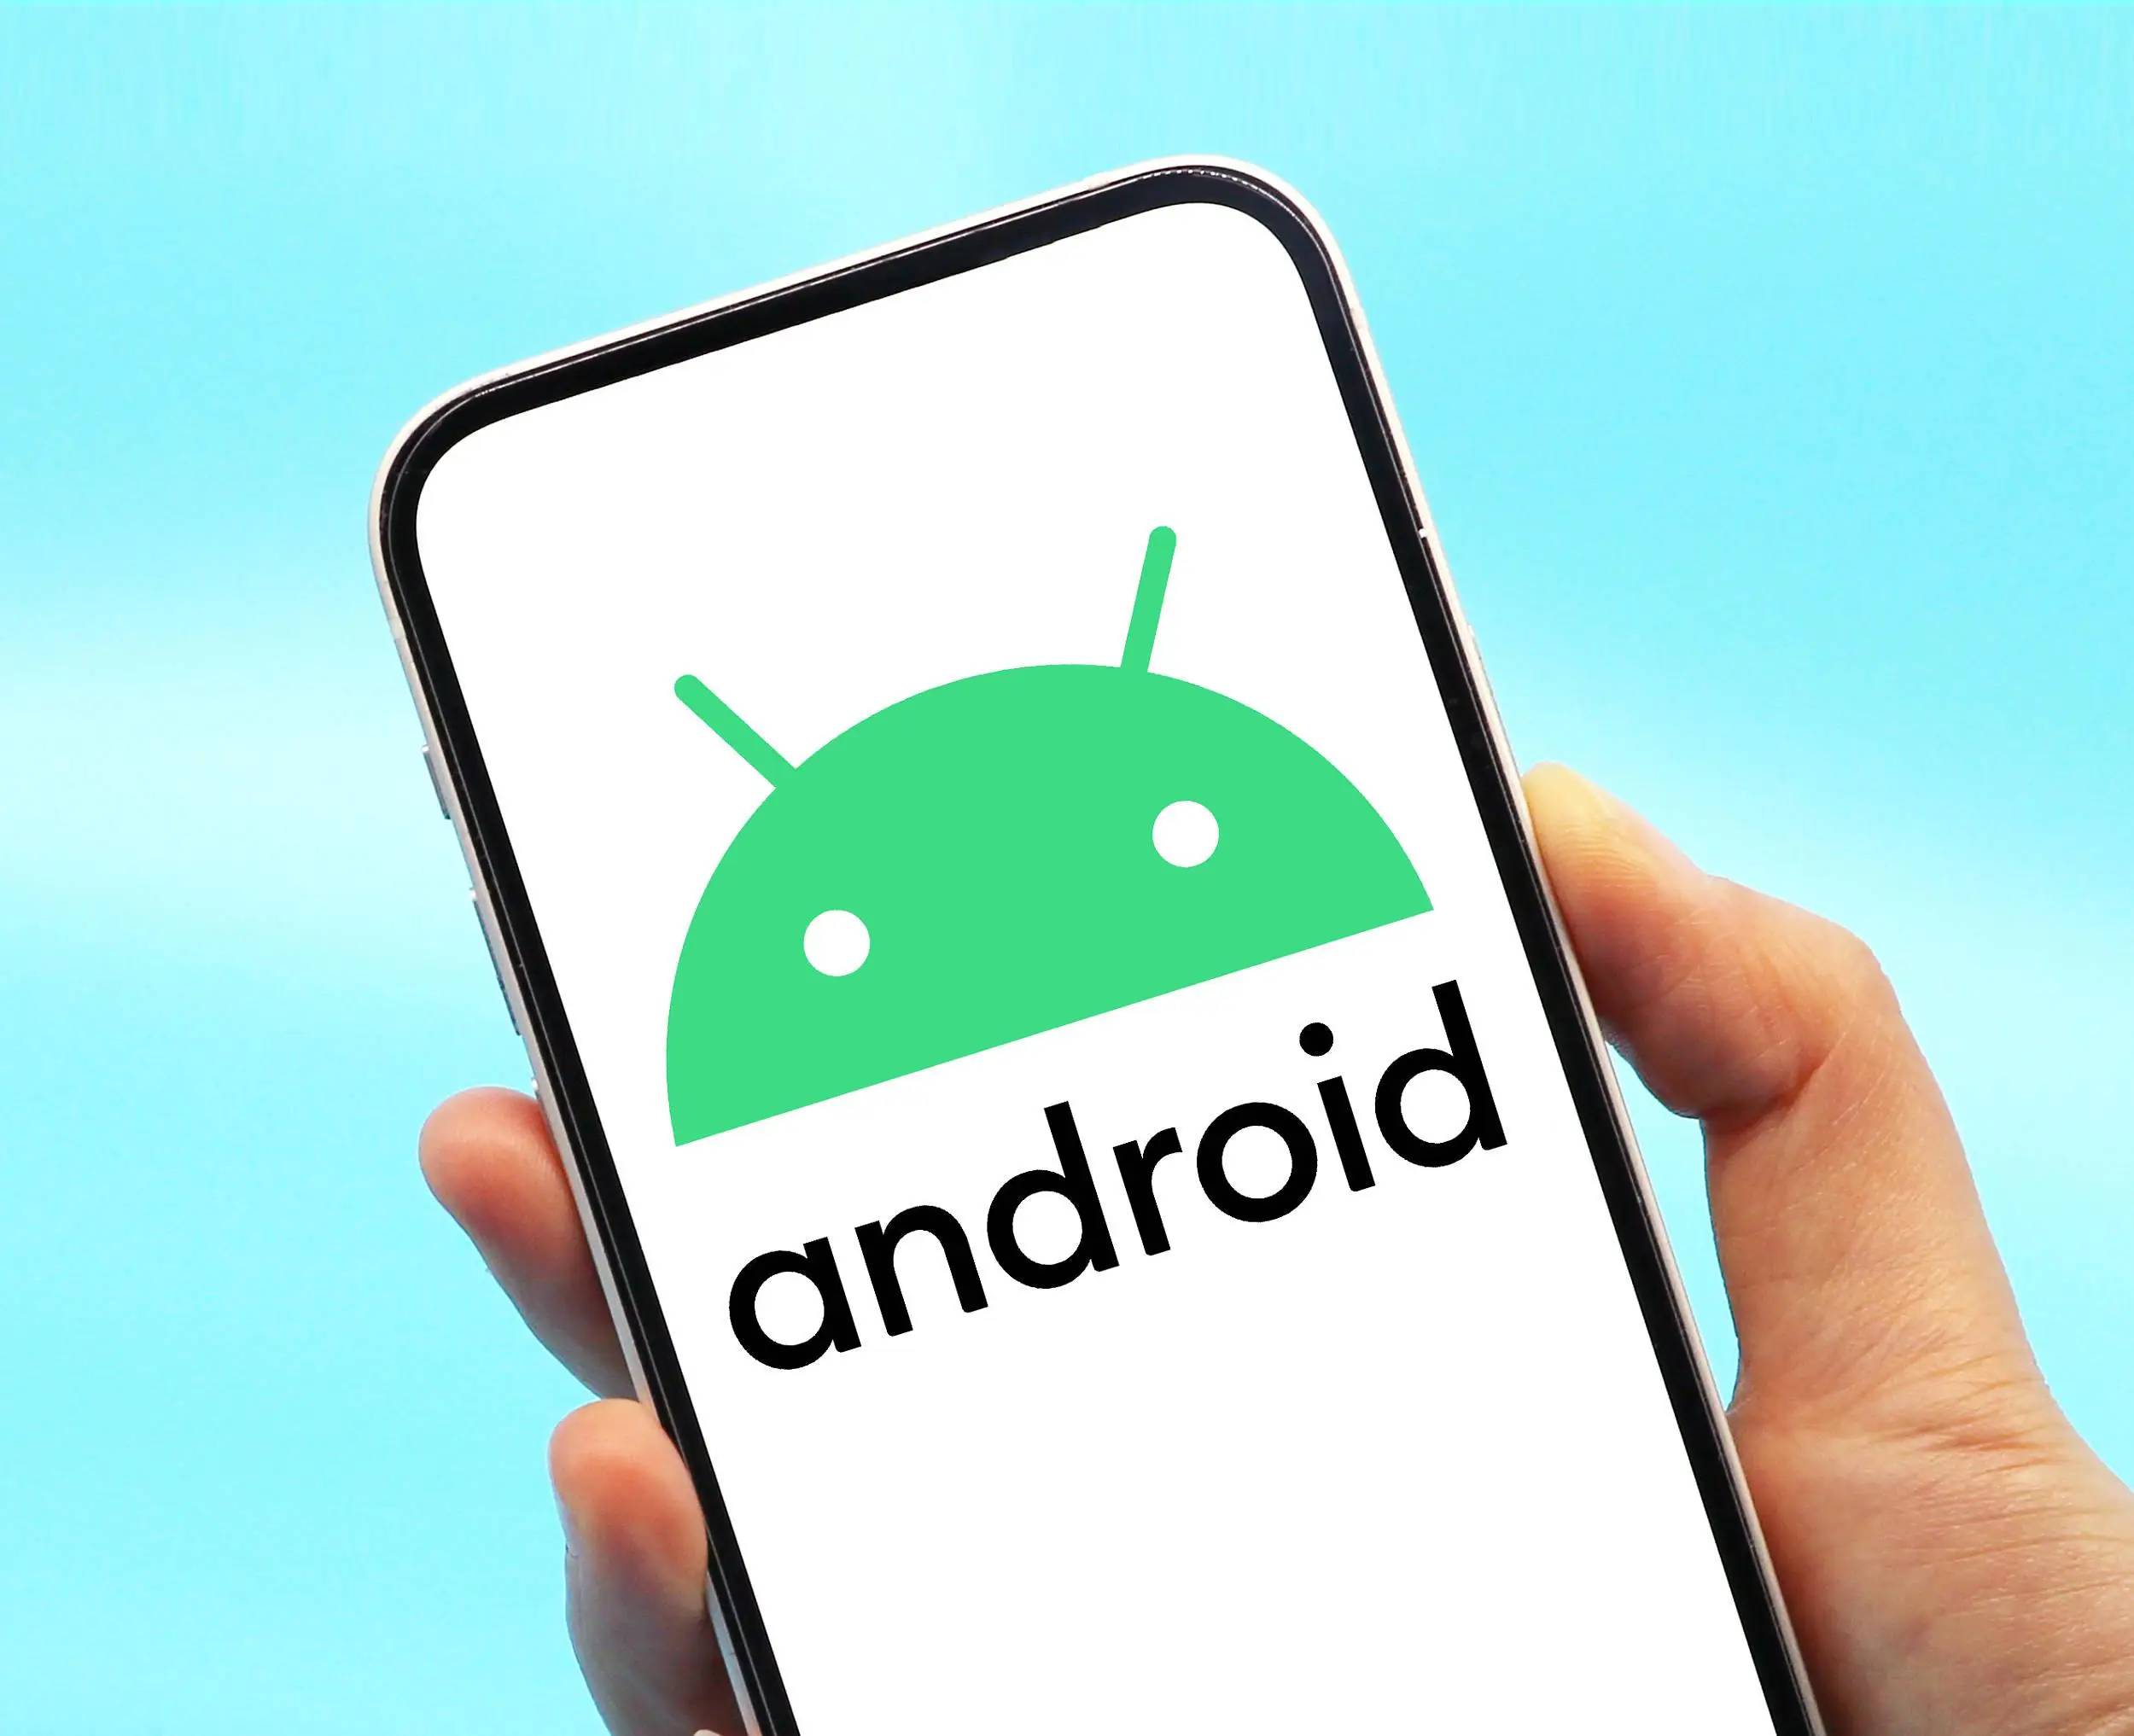 Android系统更新：为何如此重要？  第3张